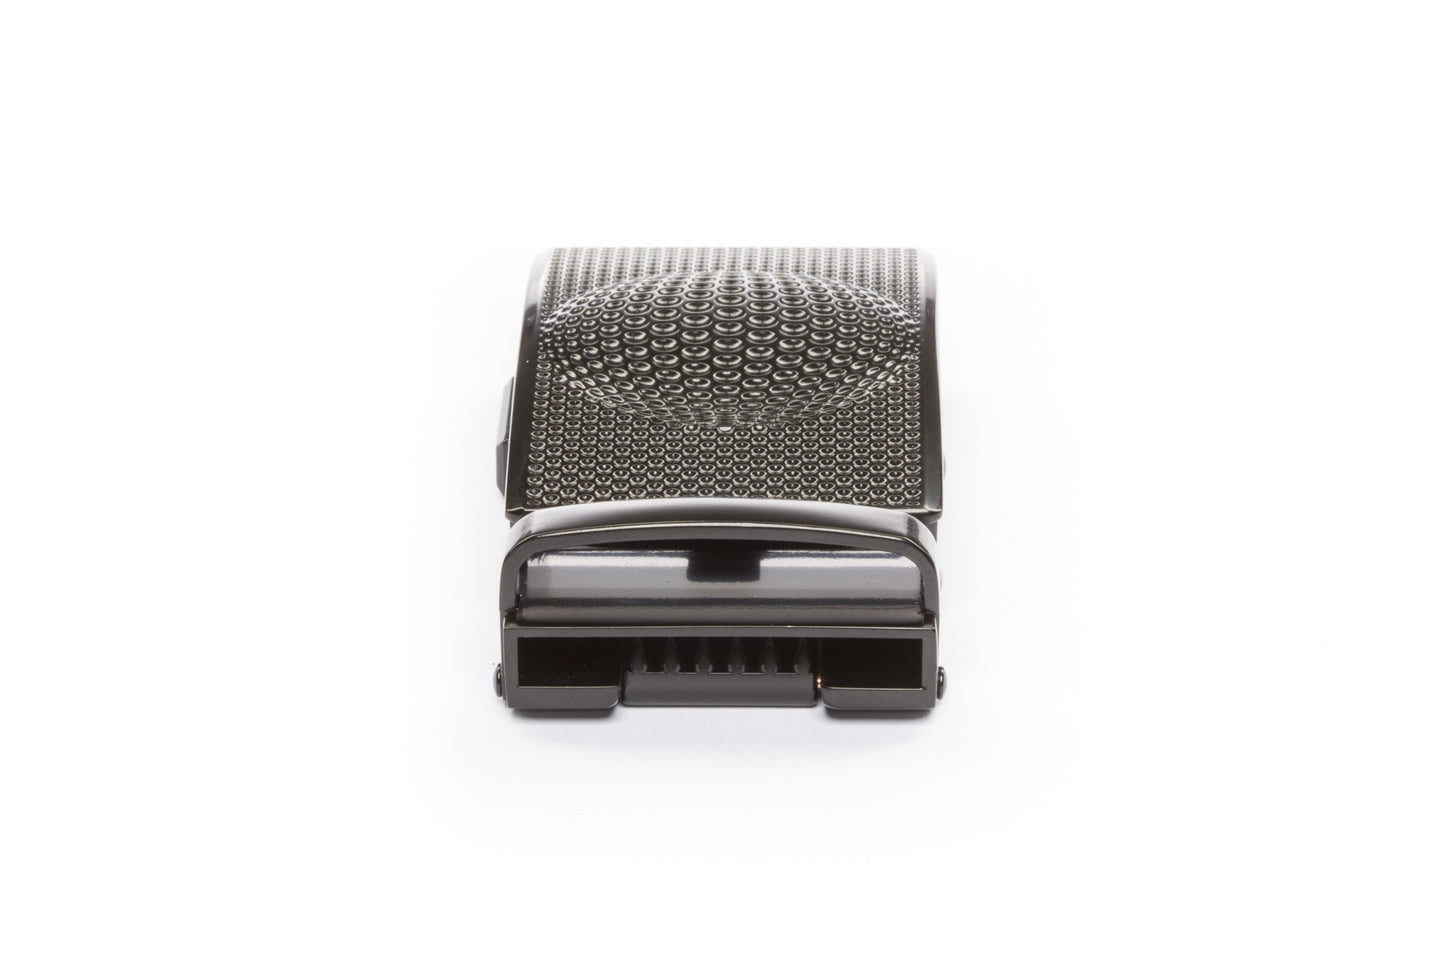 Men's golf ratchet belt buckle in black with a width of 1.5 inches, rear view.